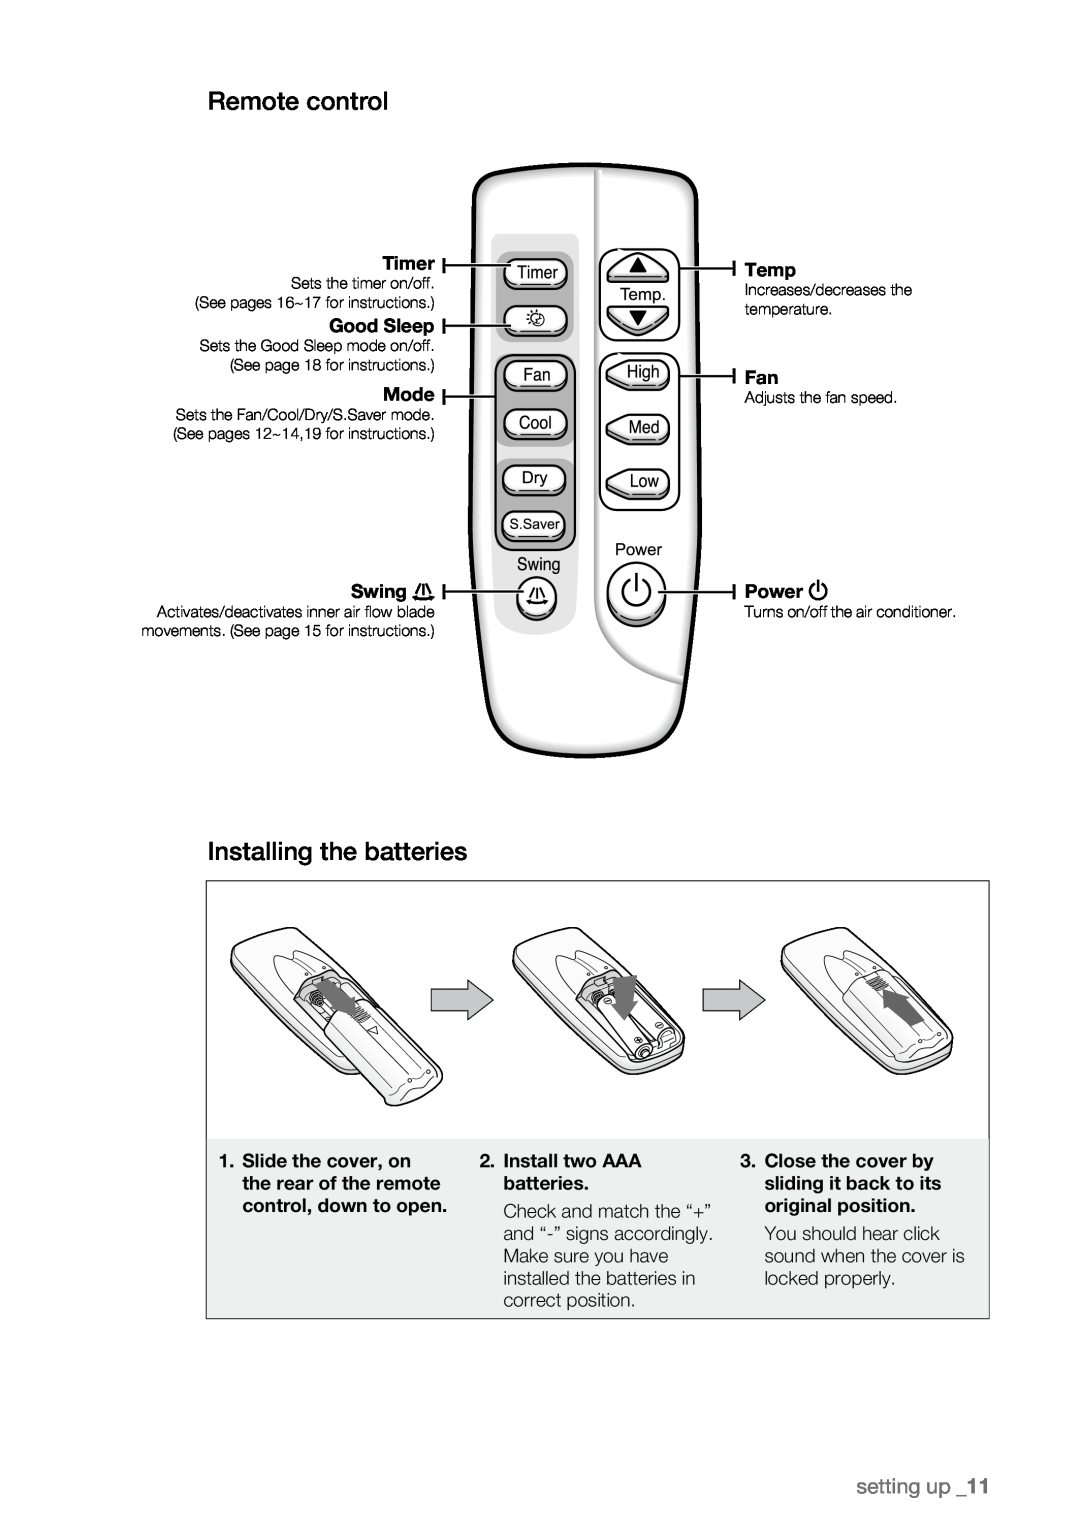 Samsung AW09LH Series, AW07LH Series user manual Remote control, Installing the batteries, setting up _11 